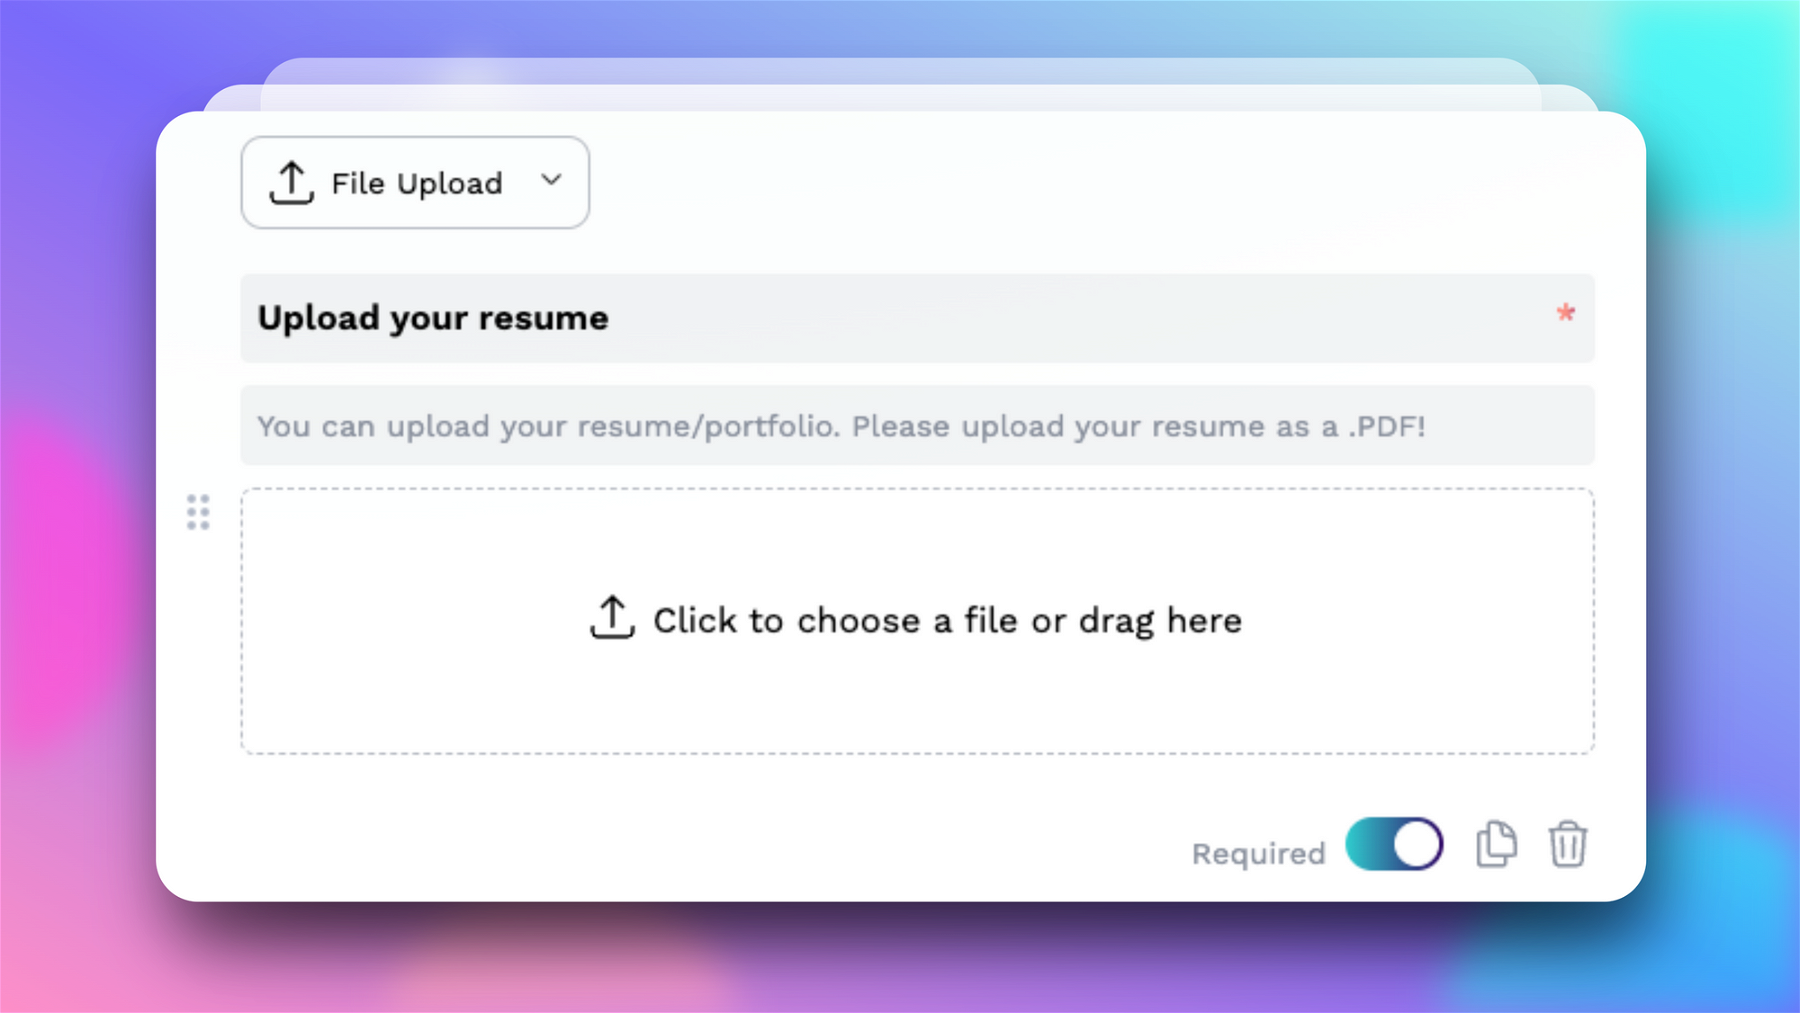 Example of a File Upload question: “Upload your resume”. Responders can click to upload a file or drag a file directly onto the upload area.